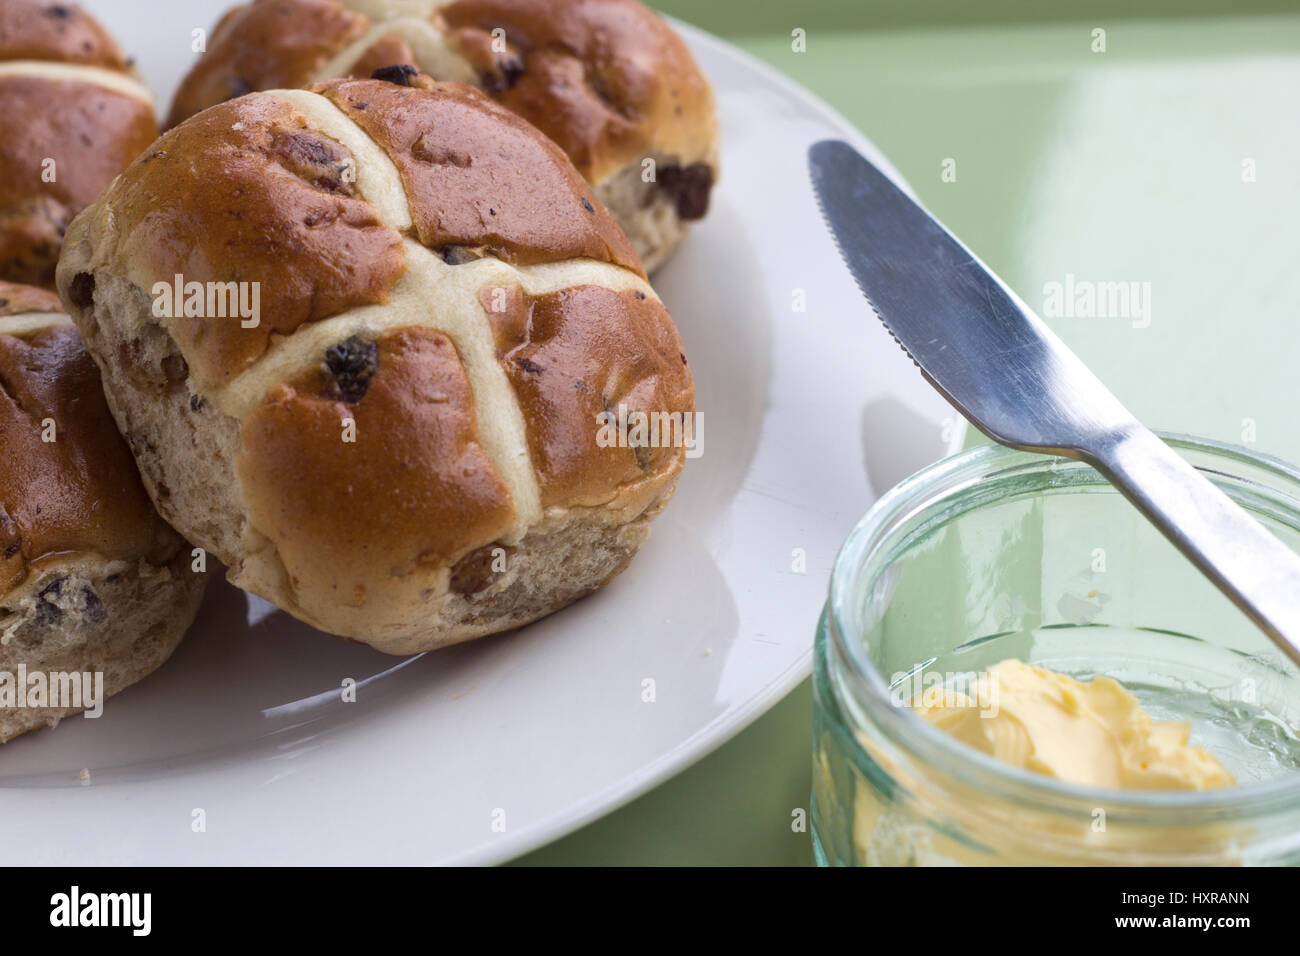 In 12th century an Anglican monk baked the buns and marked them with a cross in honor of Good Friday. they became a symbol of Easter weekend. Stock Photo